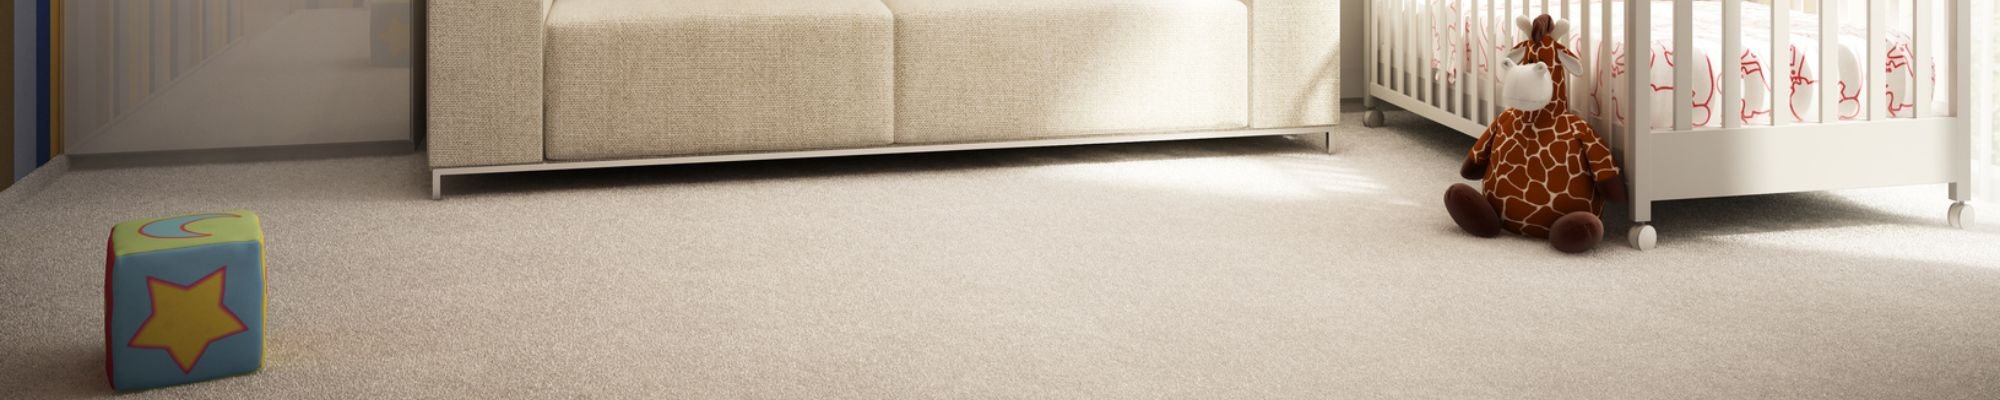 carpet flooring provided by Henson's Greater Tennessee Flooring in Knoxville TN